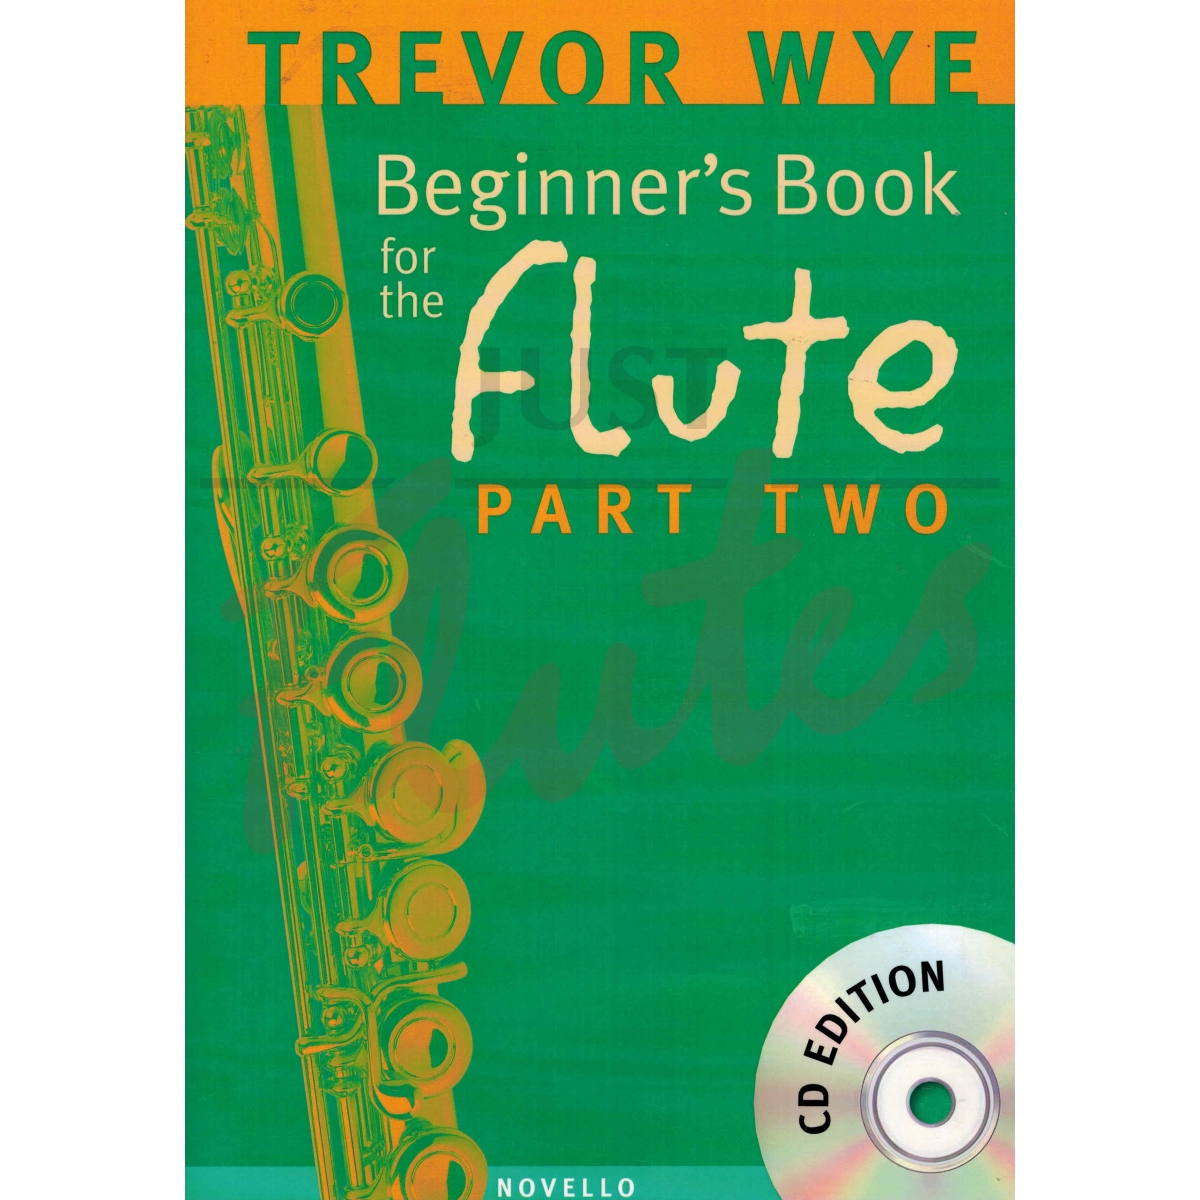 Beginner's Book for the Flute, Part Two